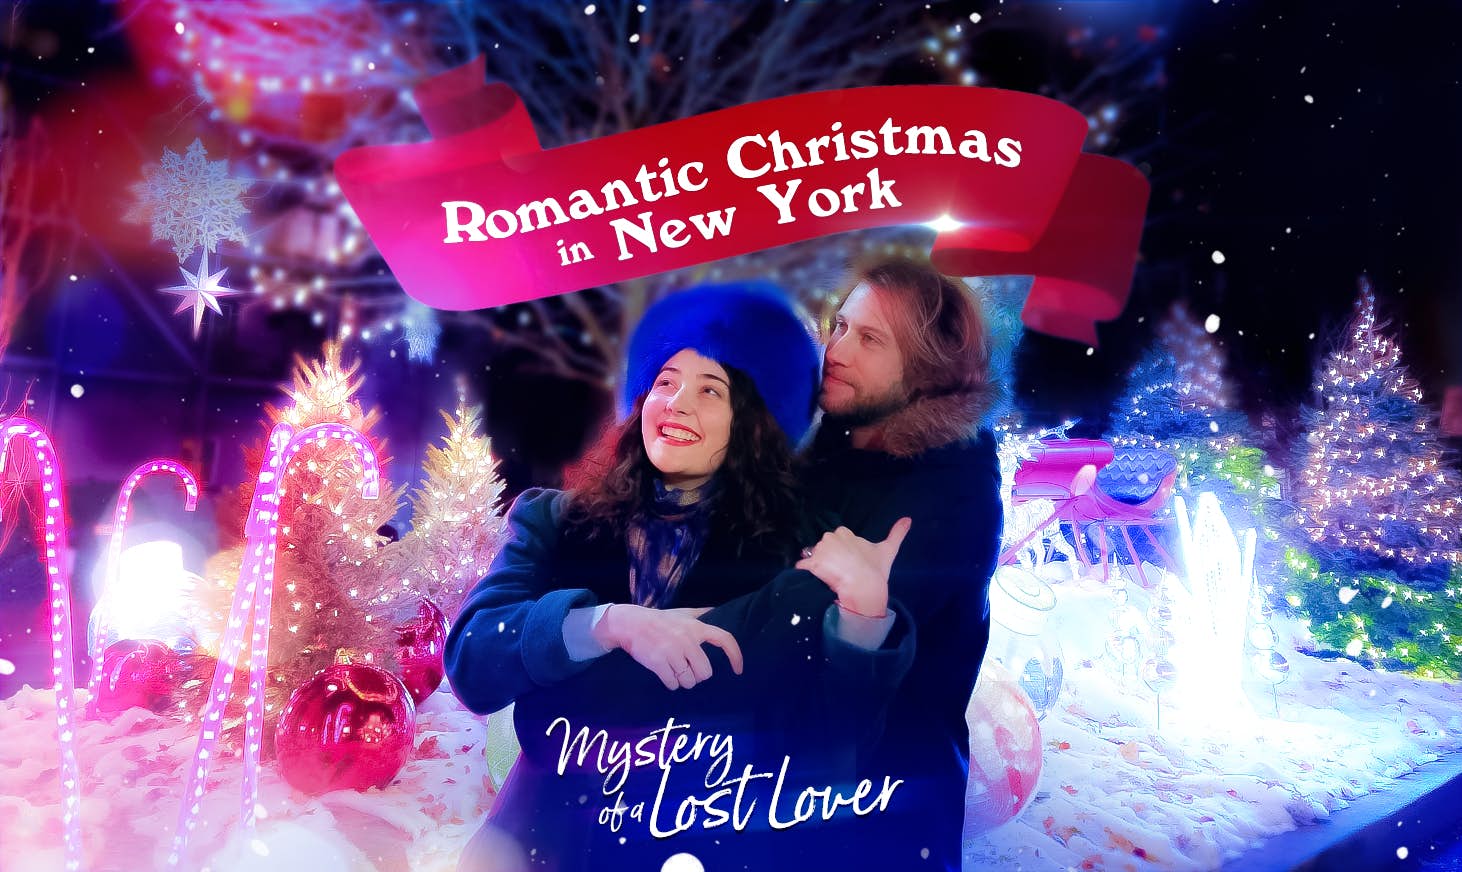 Romantic Christmas: Mystery of a Lost Lover, New York image